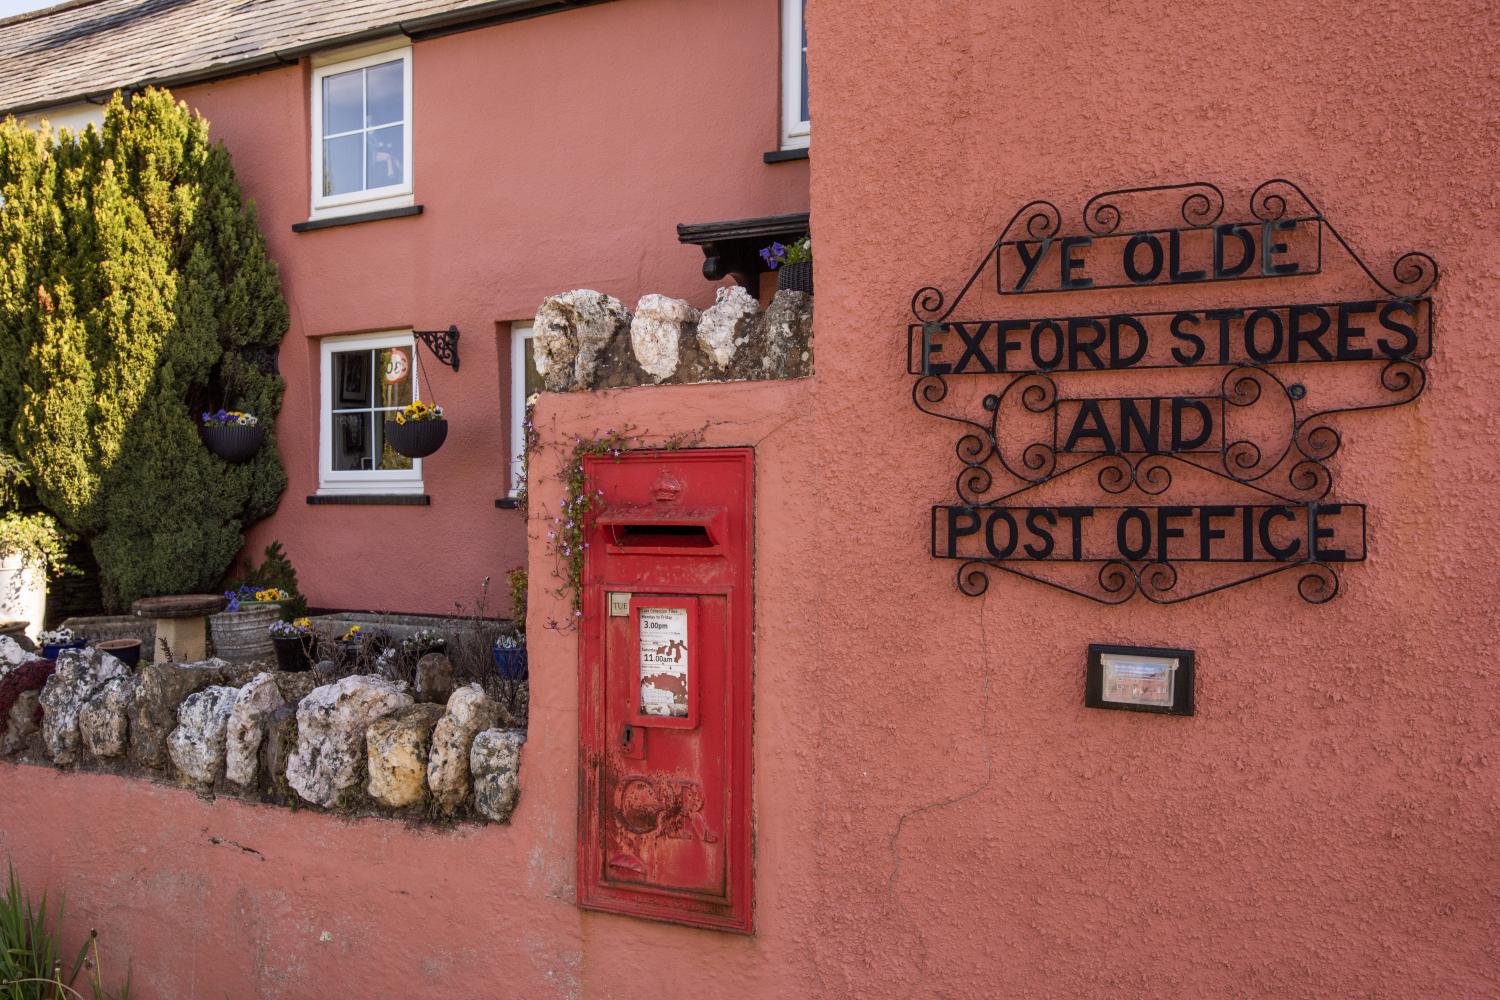 The Old Post Office, Exford